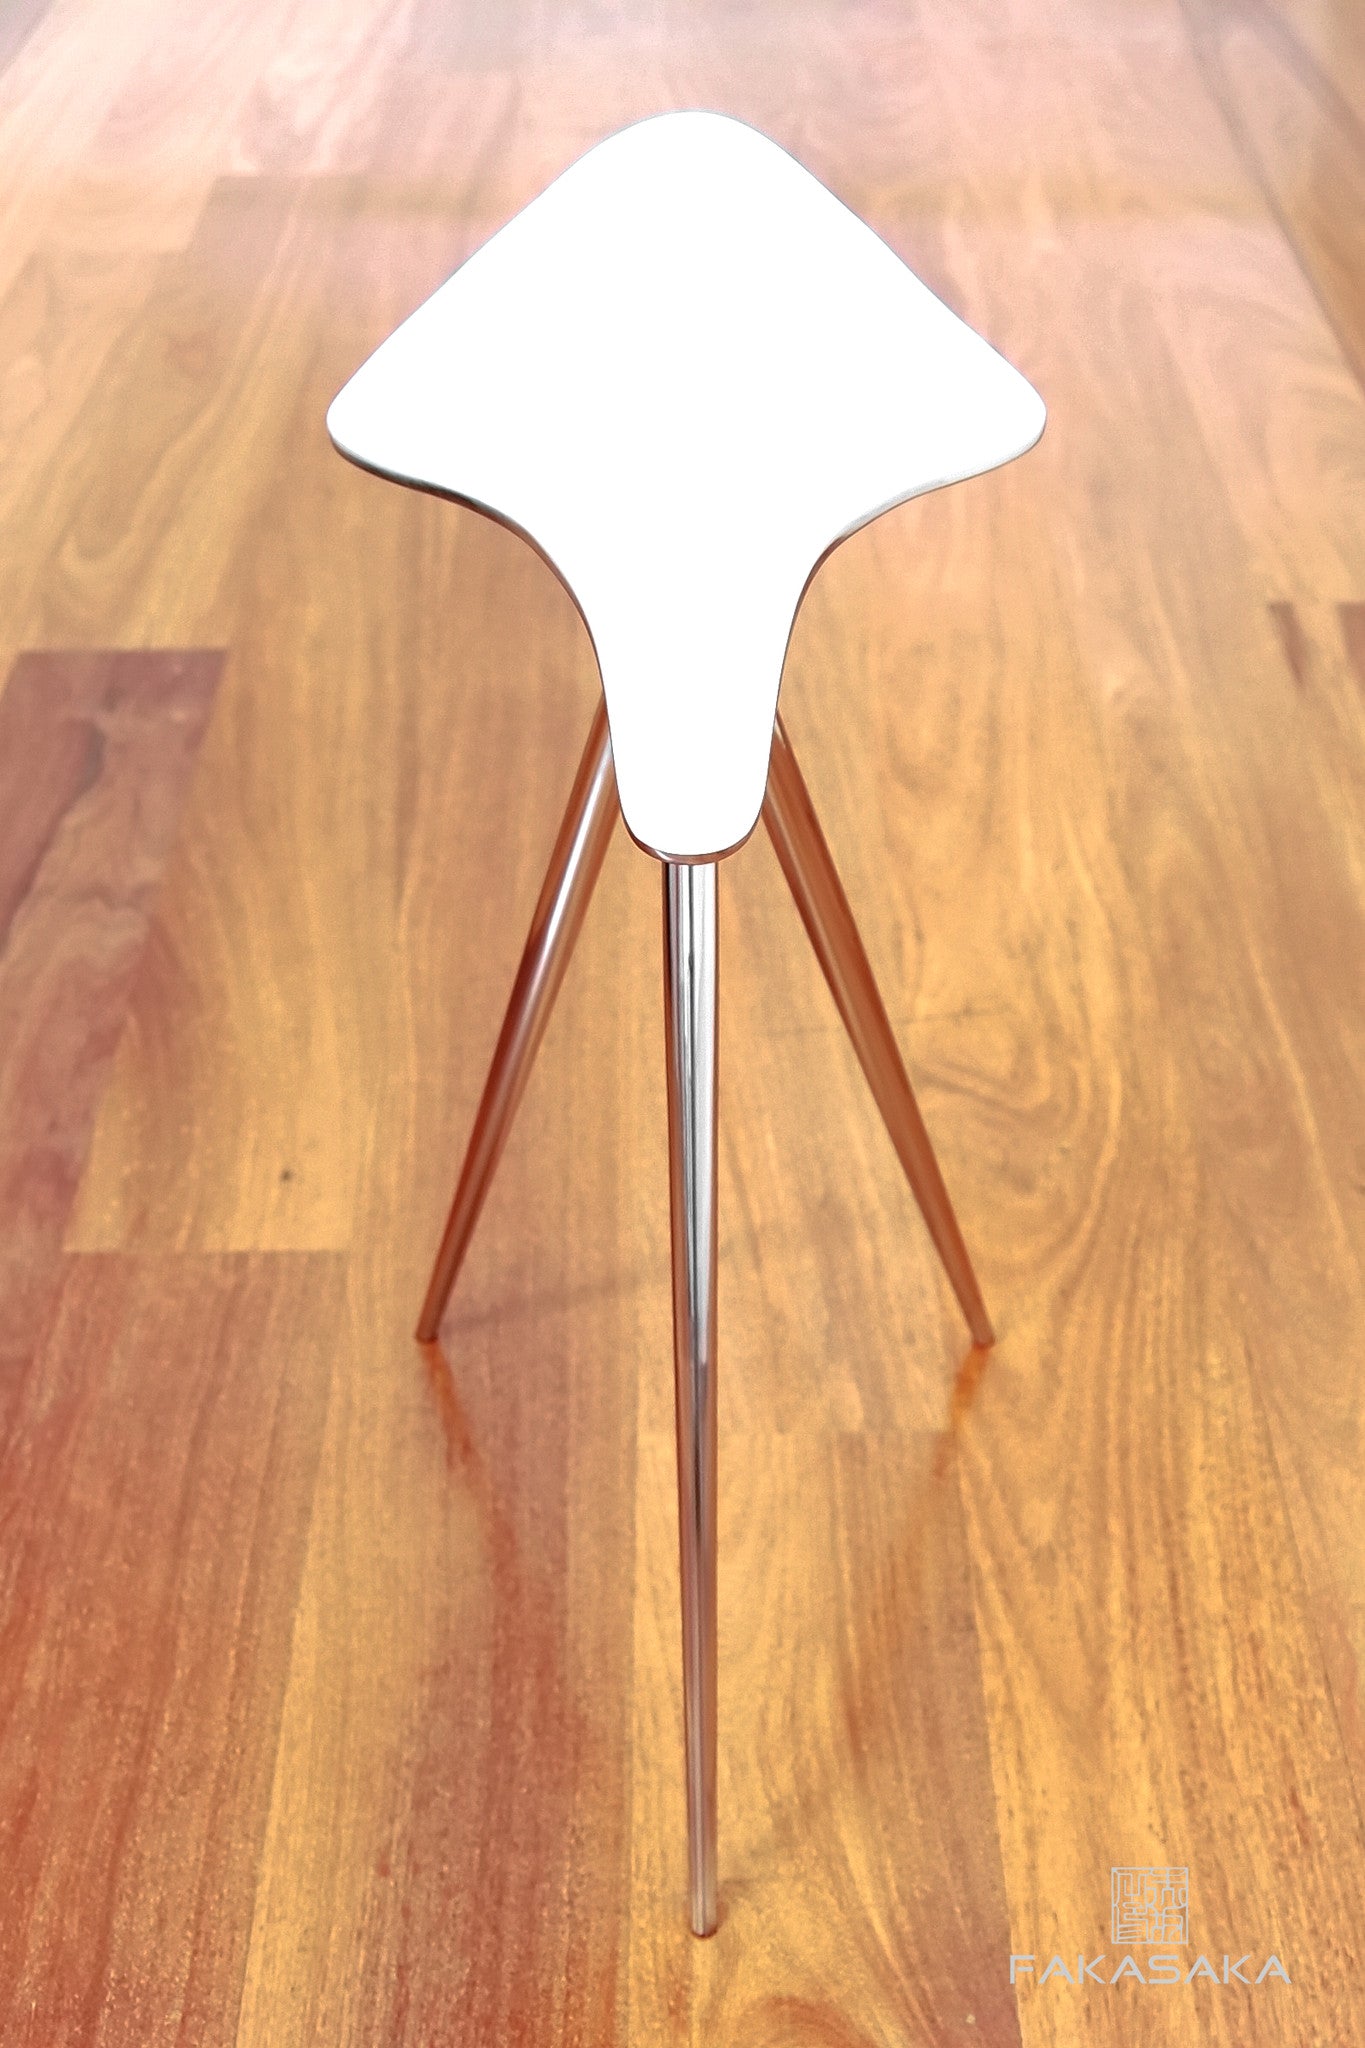 FA3 STOOL<br><br>STAINLESS STEEL